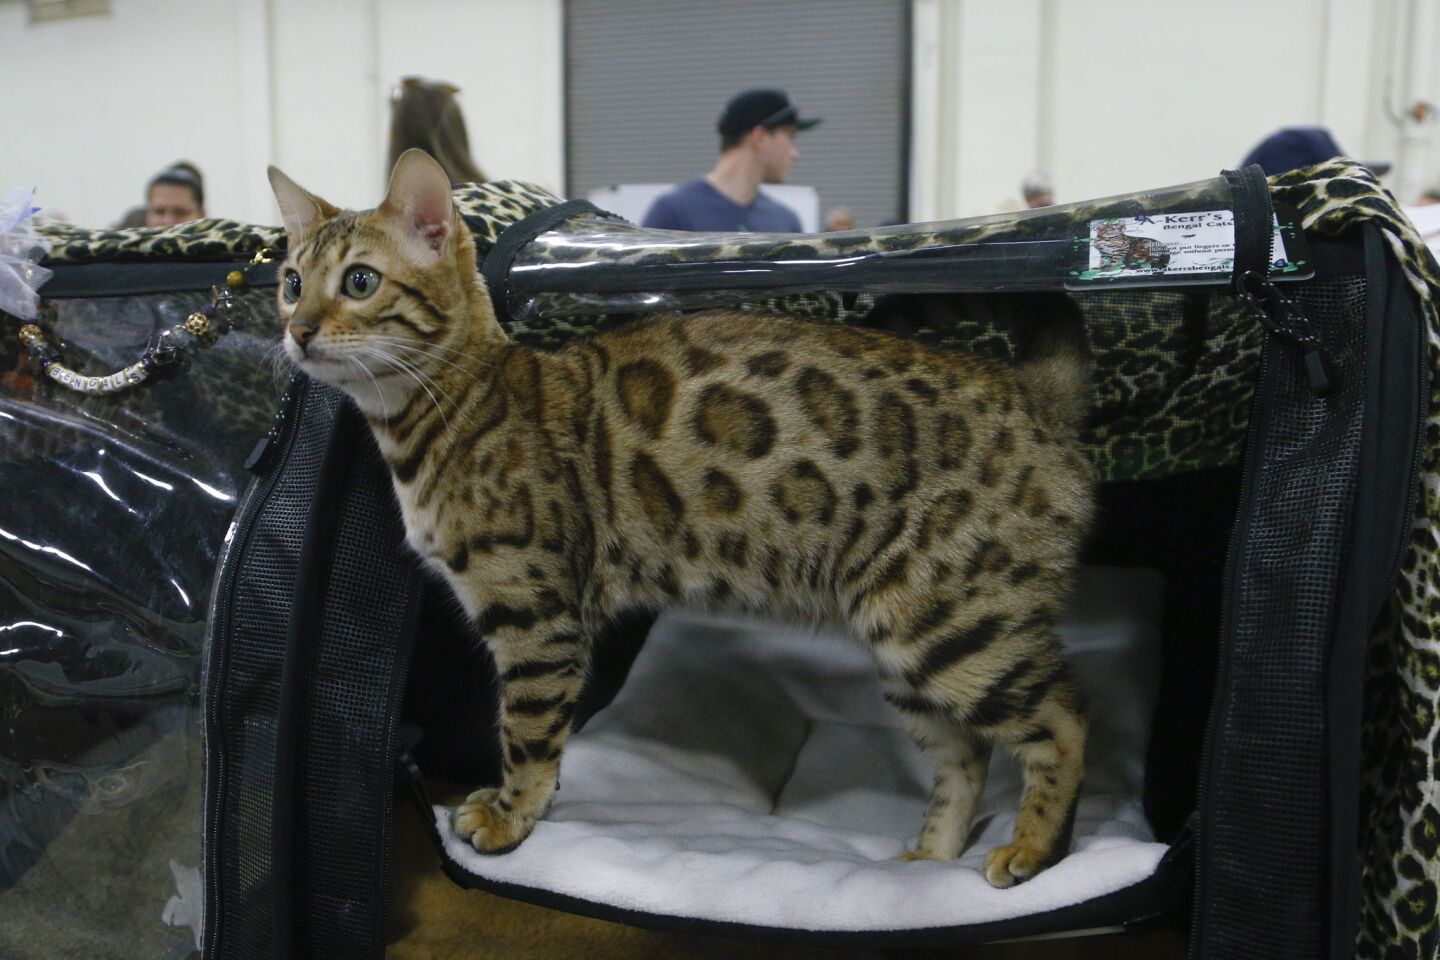 San Diego Cat Show, "Food and Water Bowl XXVI"